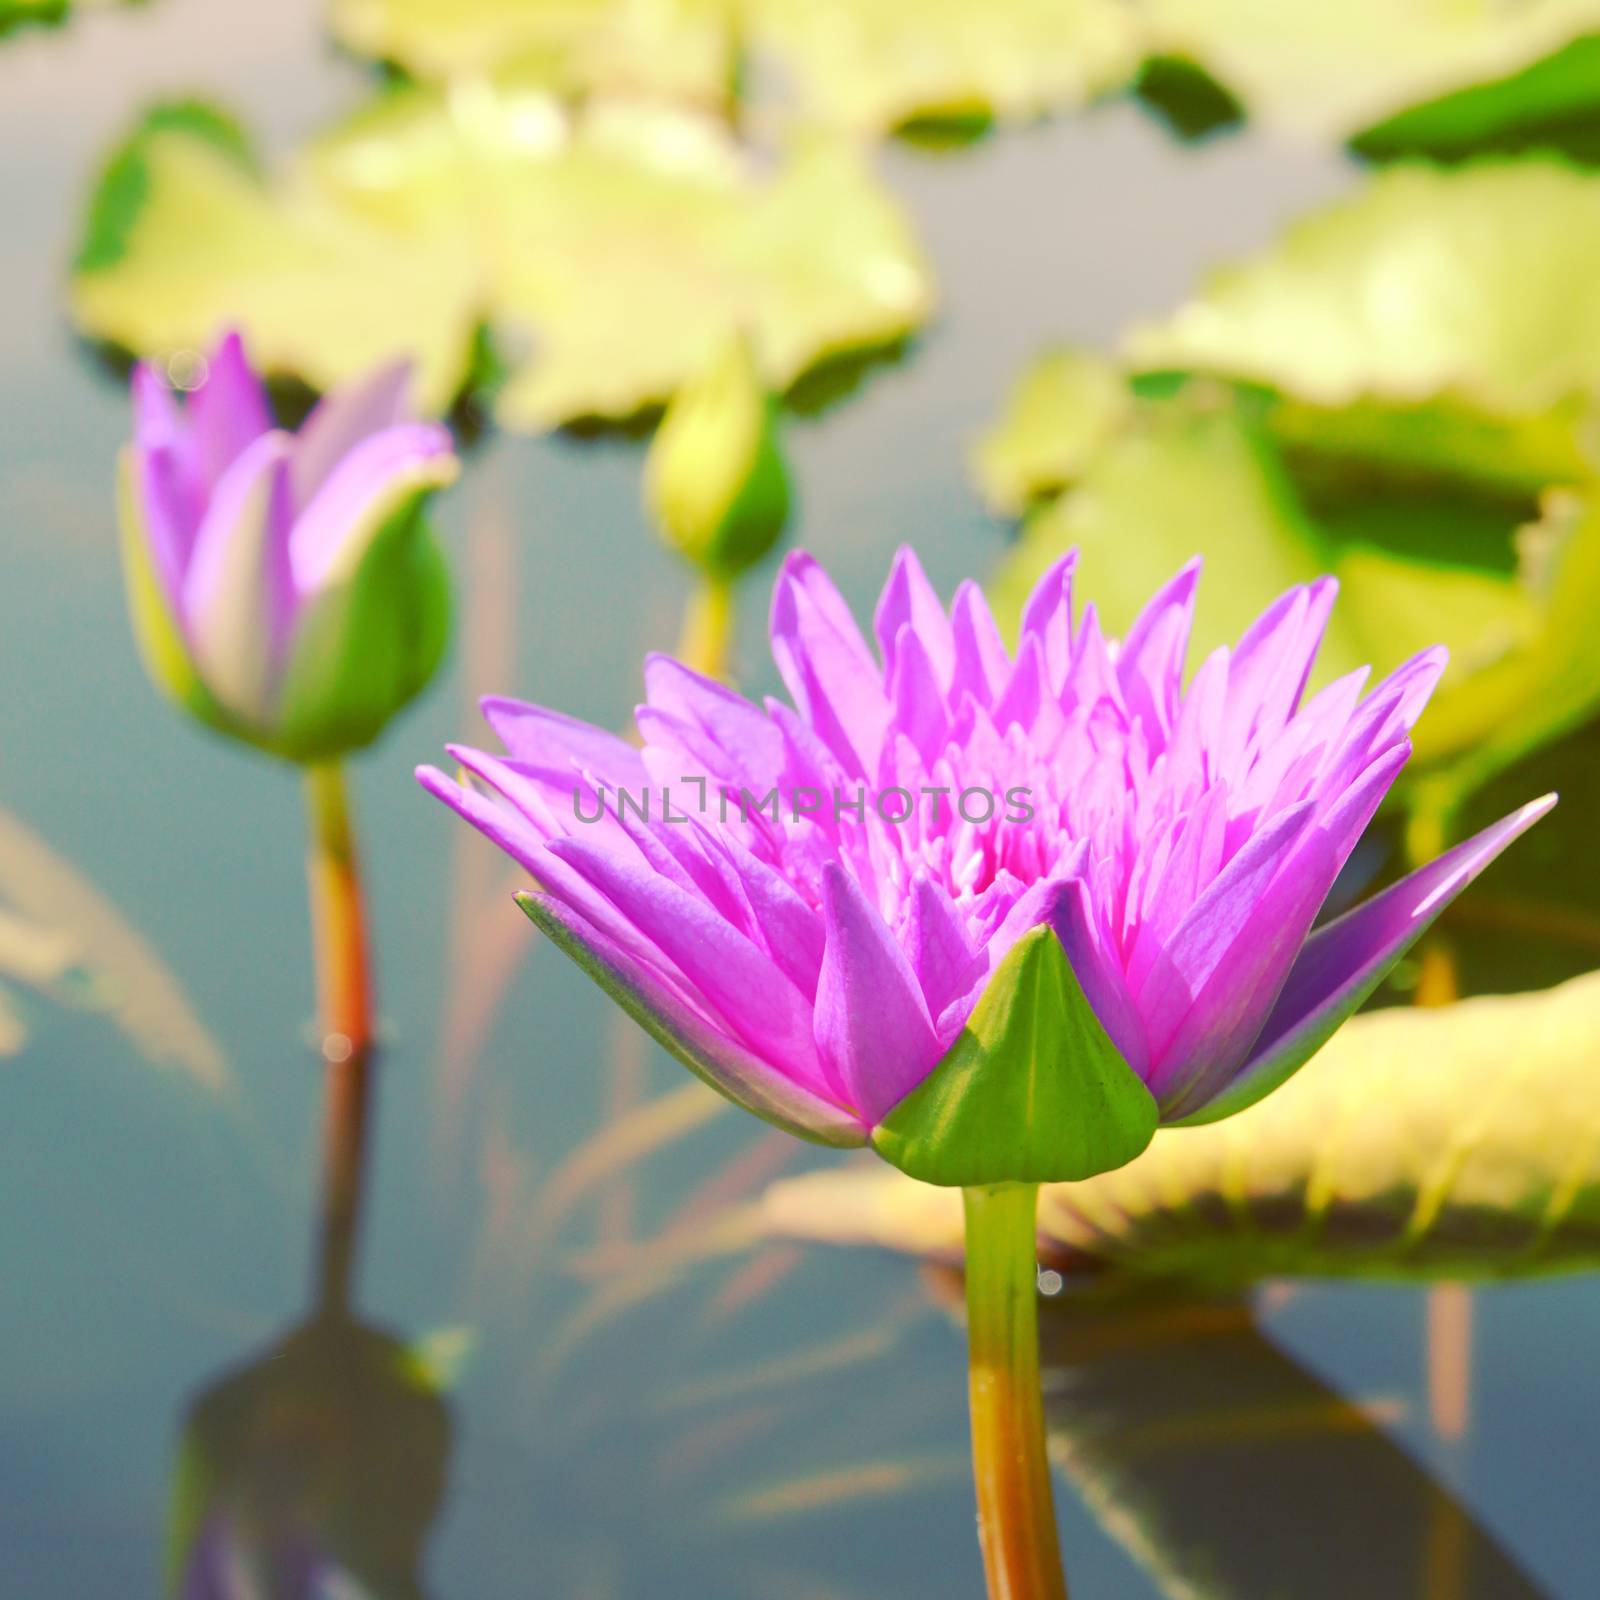 Lotus flower on the water with retro filter effect by nuchylee